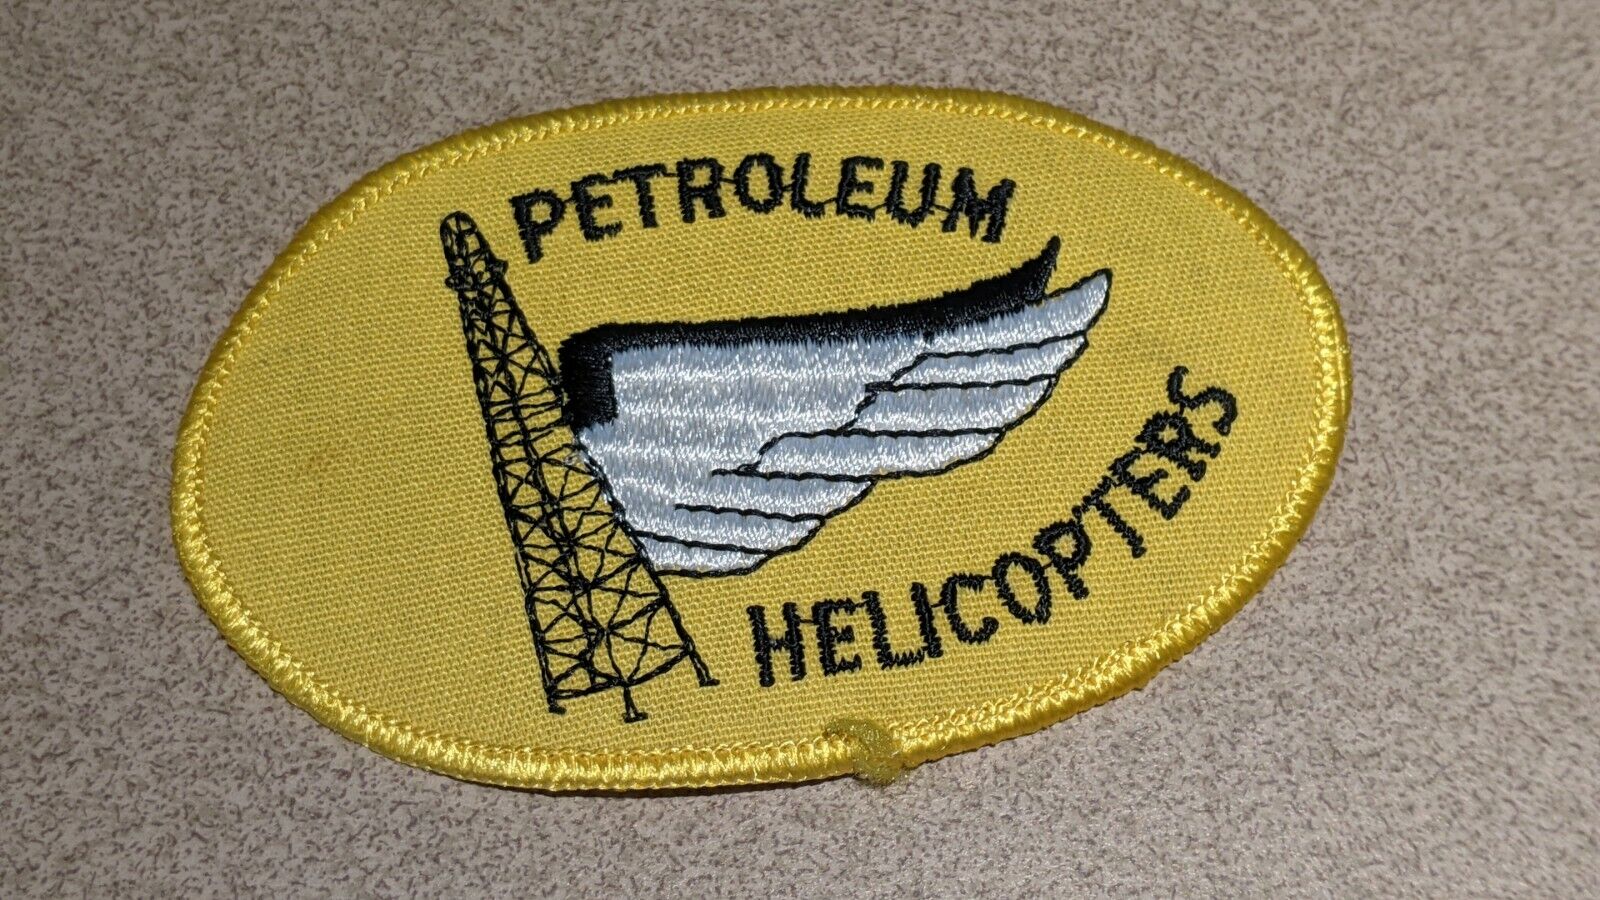 PETROLEUM HELICOPTERS - Embroidered Sew On PATCH Oil Gas Vintage Antique